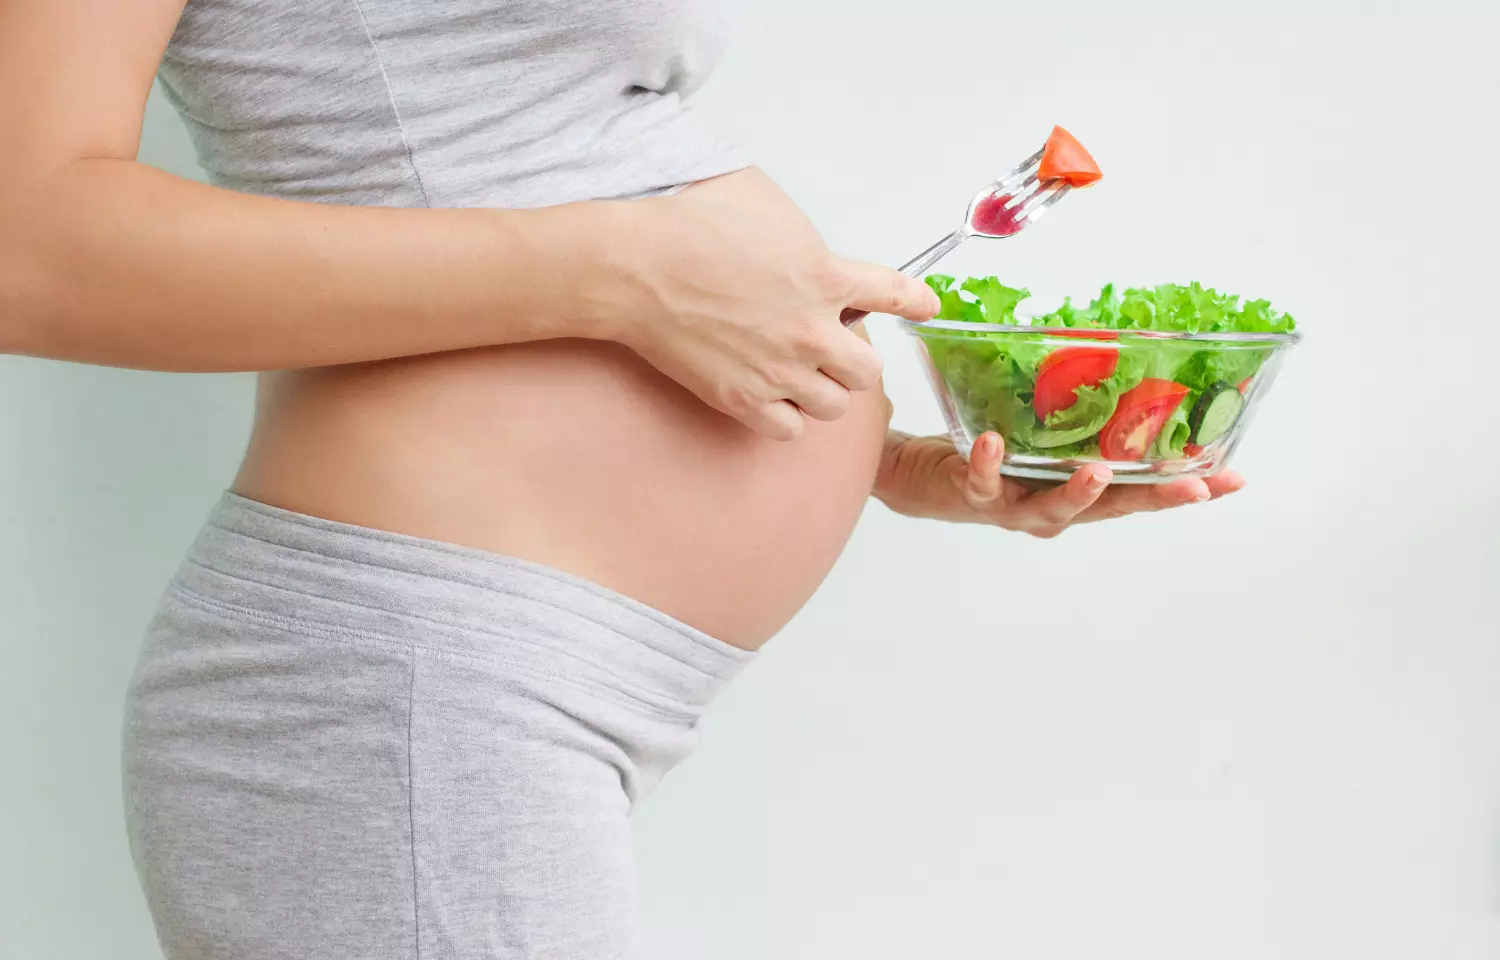 Maternal consumption of pro inflammatory diet not linked to respiratory illnesses in kids